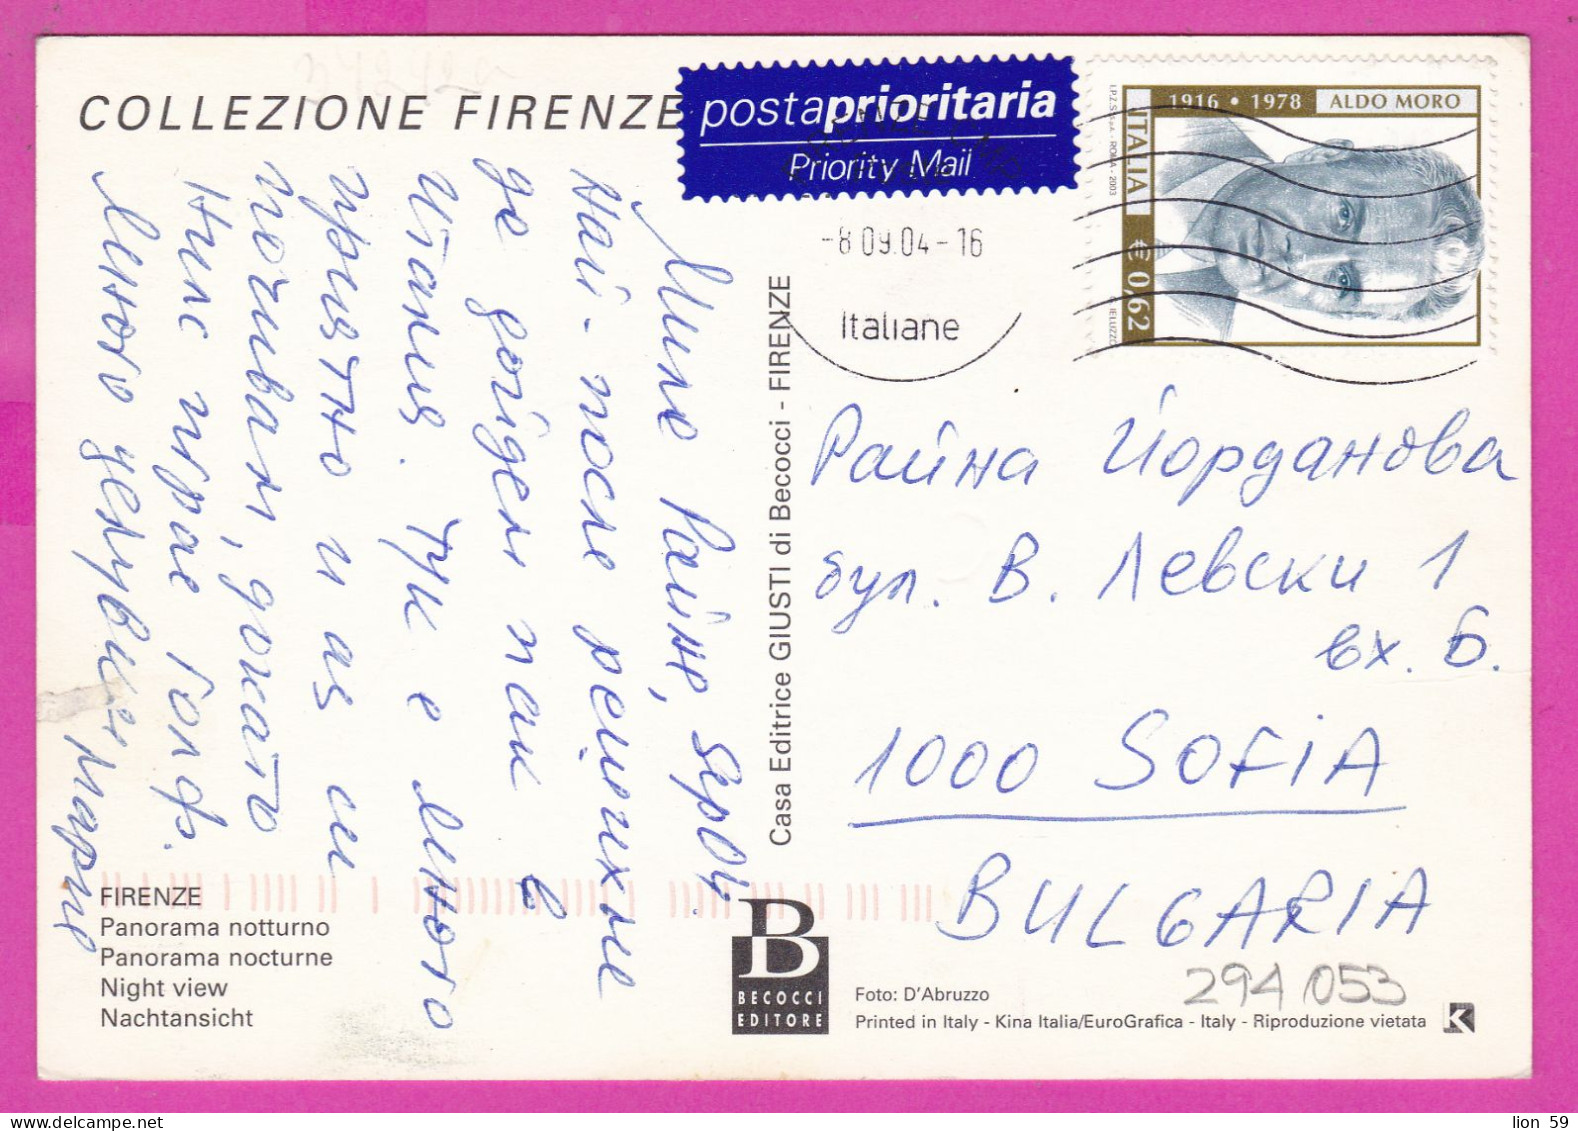 294053 / Italy - FIRENZE Panoram A Notturno Night PC 2004 USED - 0.62€ Death Of Aldo Moro Former Prime Minister - 2001-10: Marcofilie